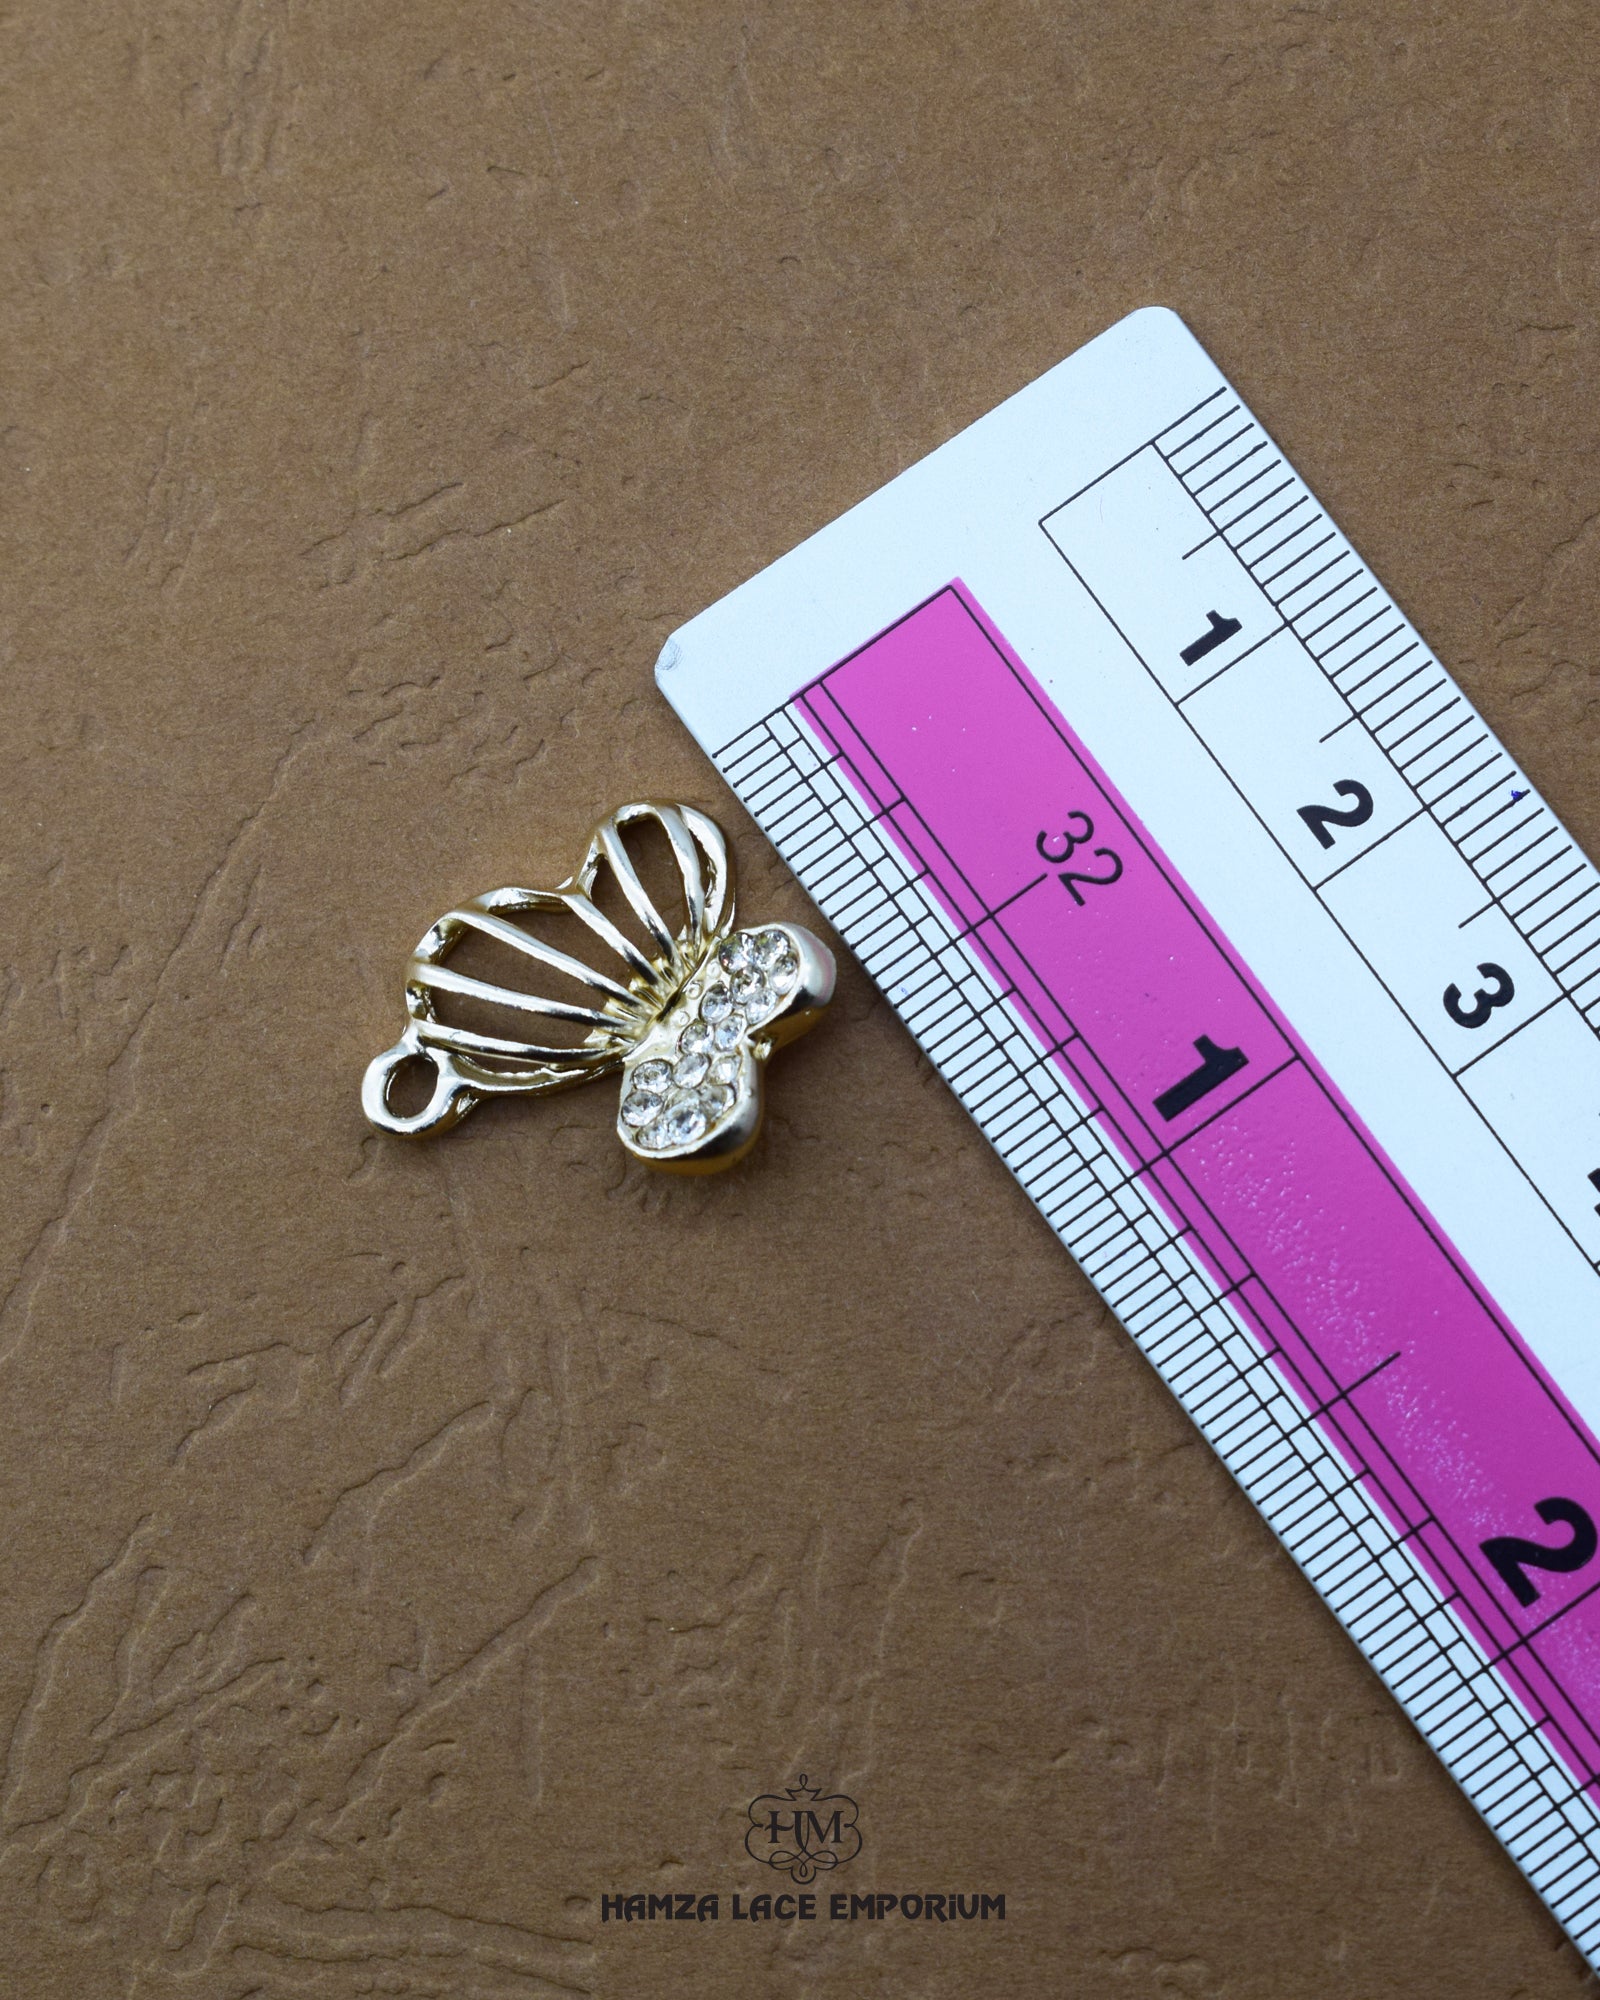 'Hanging Pearl Button 225FBC' with a ruler placed alongside it to showcase the size.